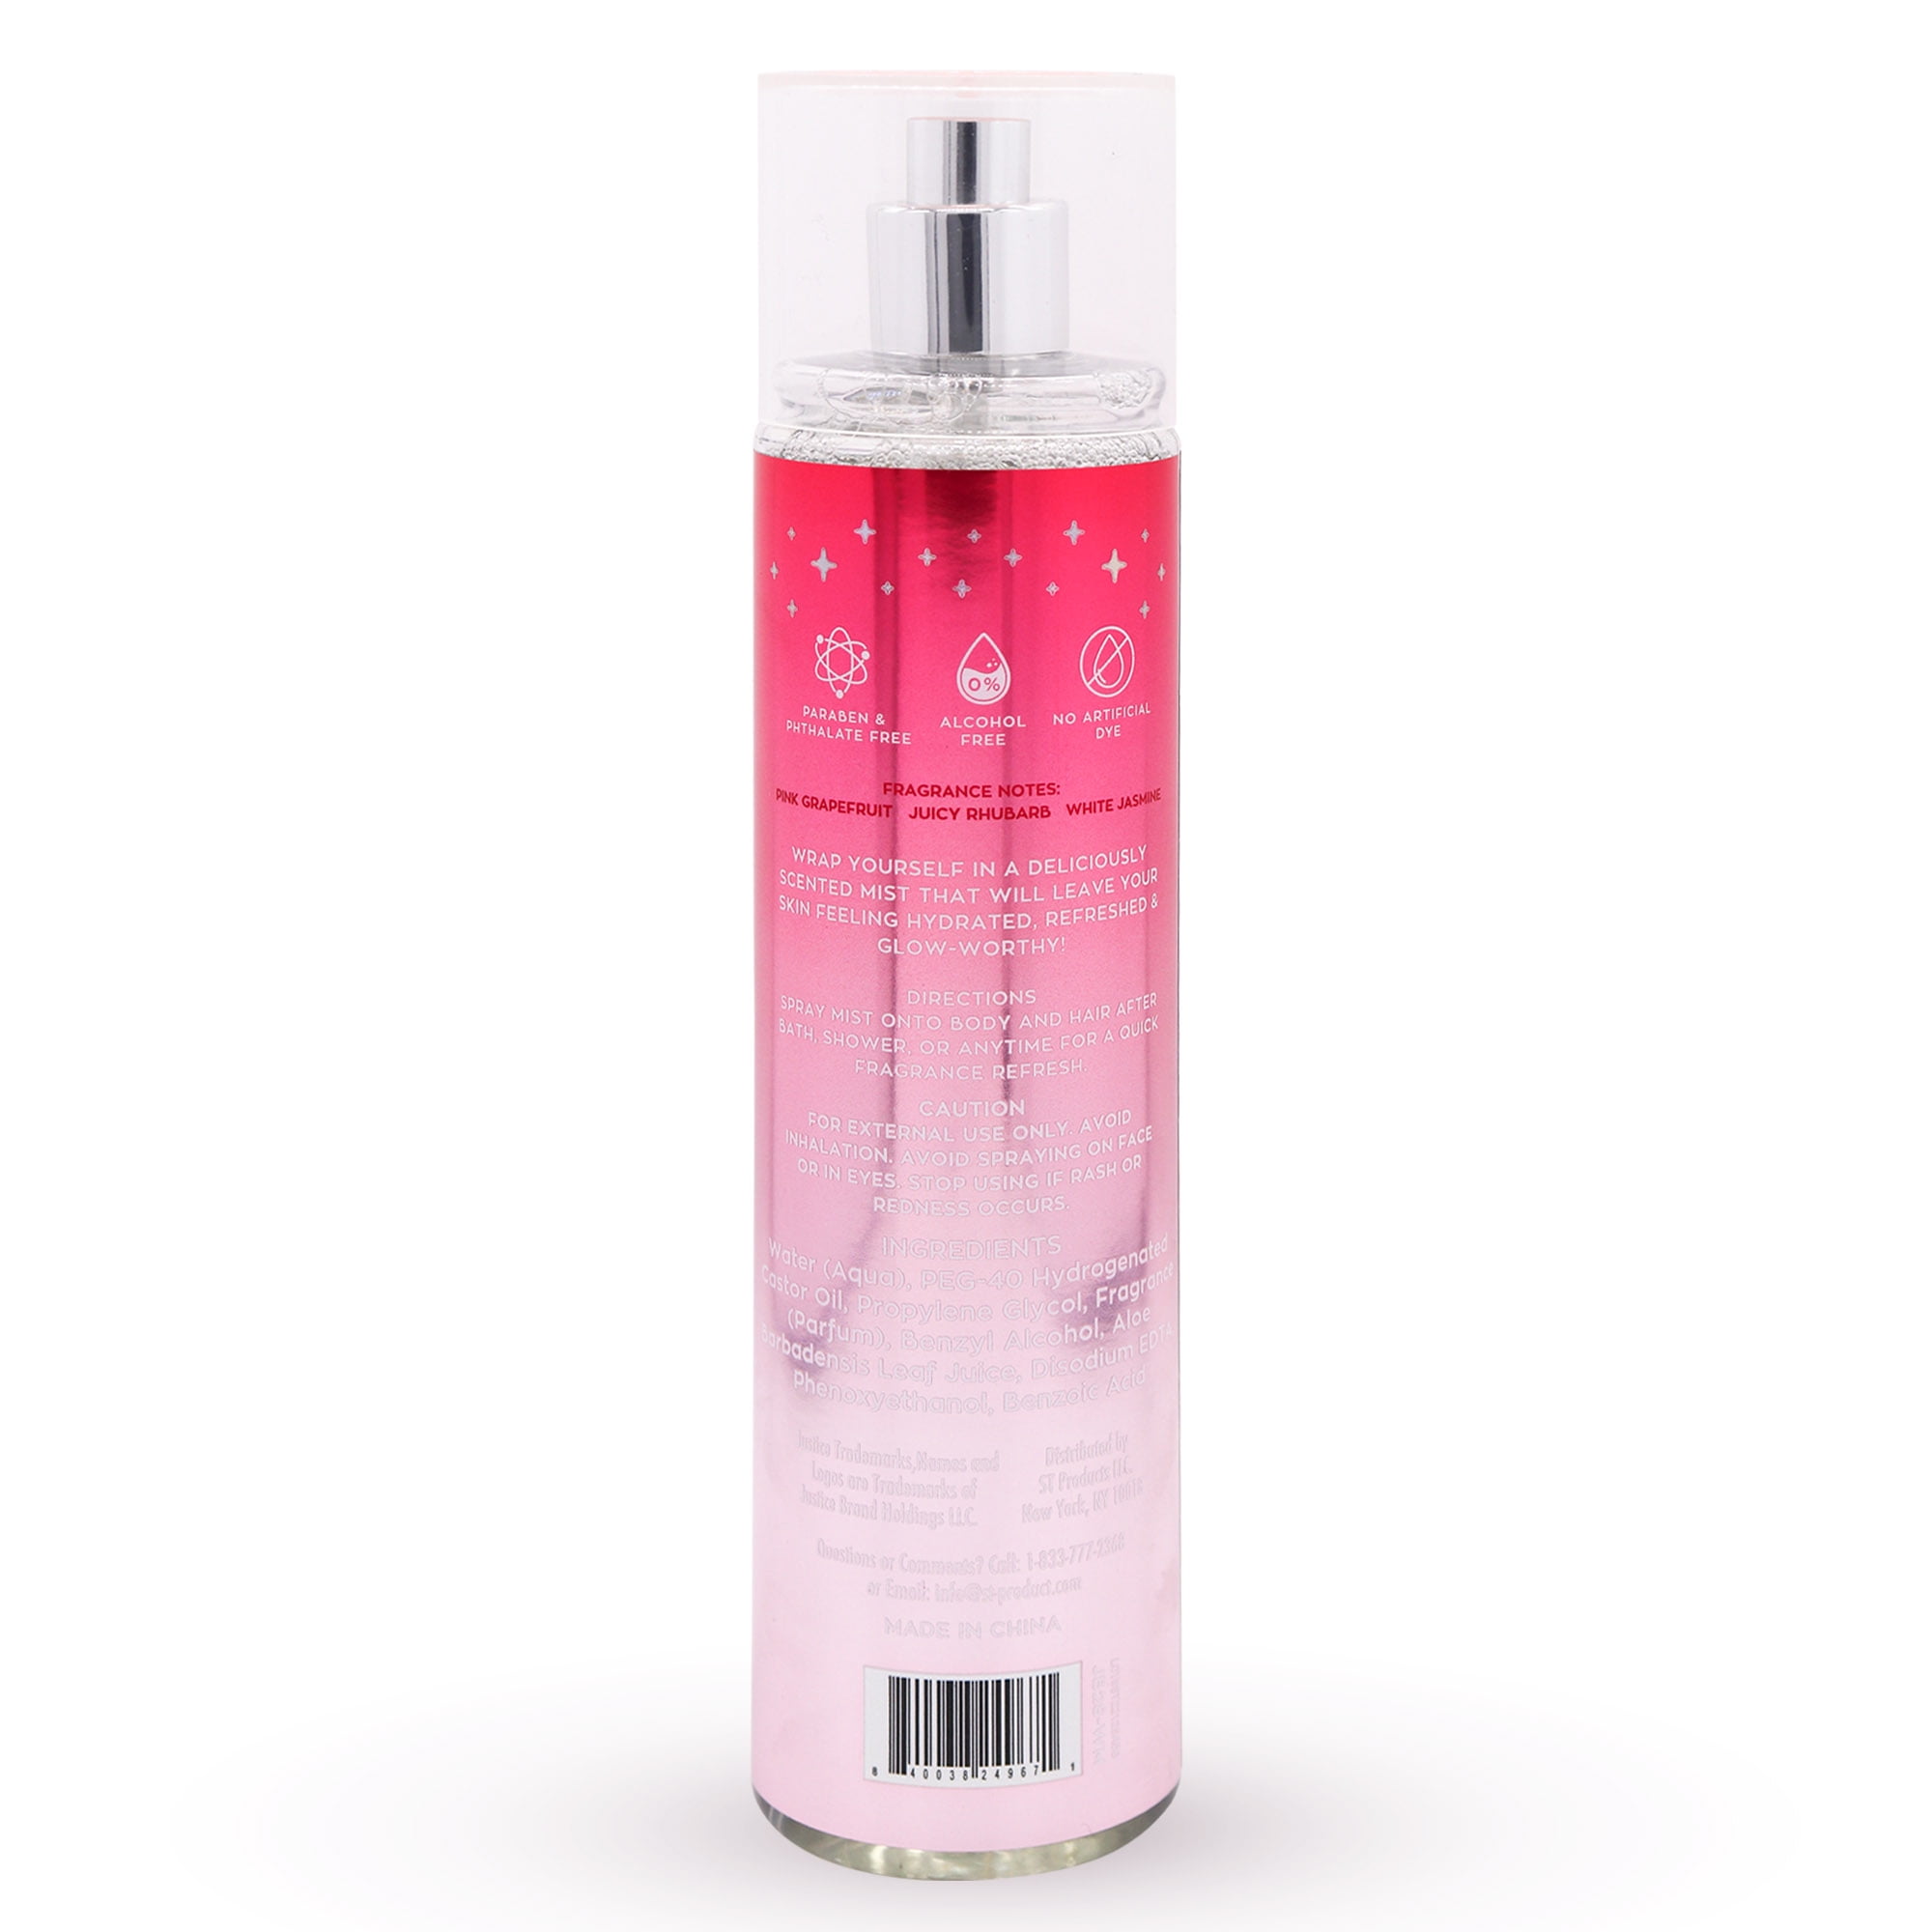 Beautiful Glow by Justice Hair and Body Fragrance Mist, Rebel Free Spirit  Berry Citrus, 8.4 fl oz